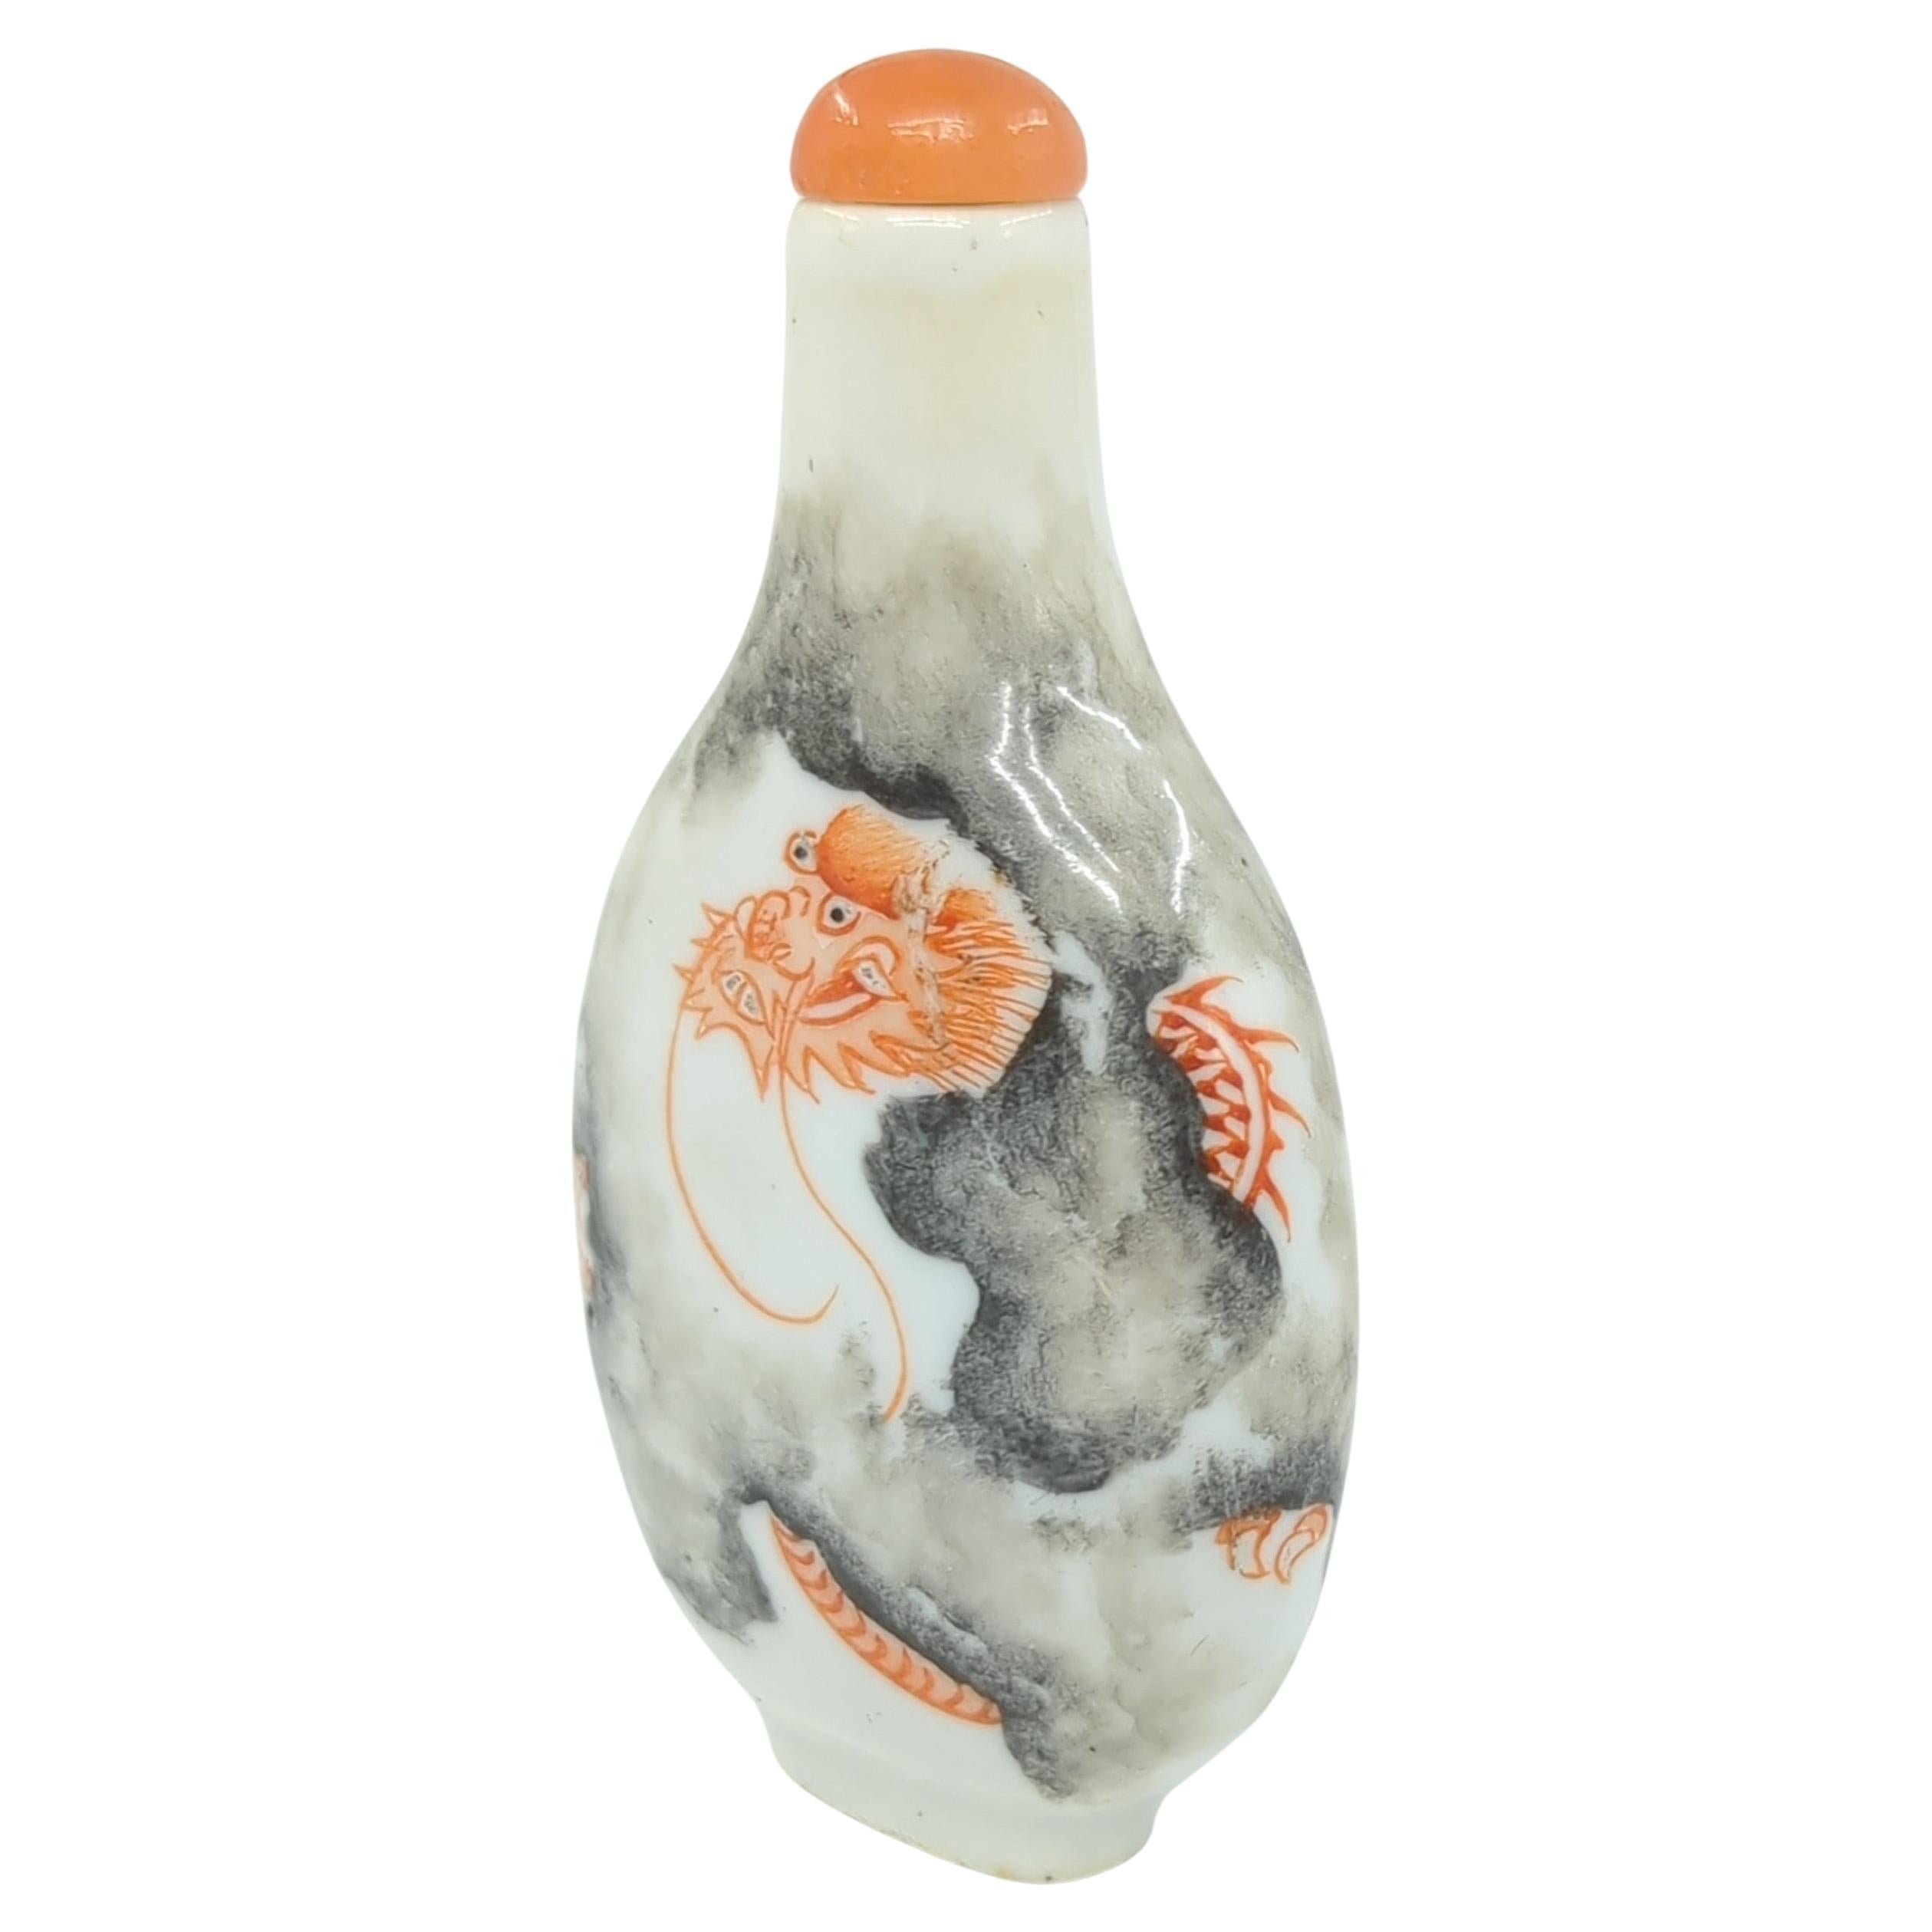 This fine Chinese porcelain snuff bottle is a beautiful example of fencai, or 